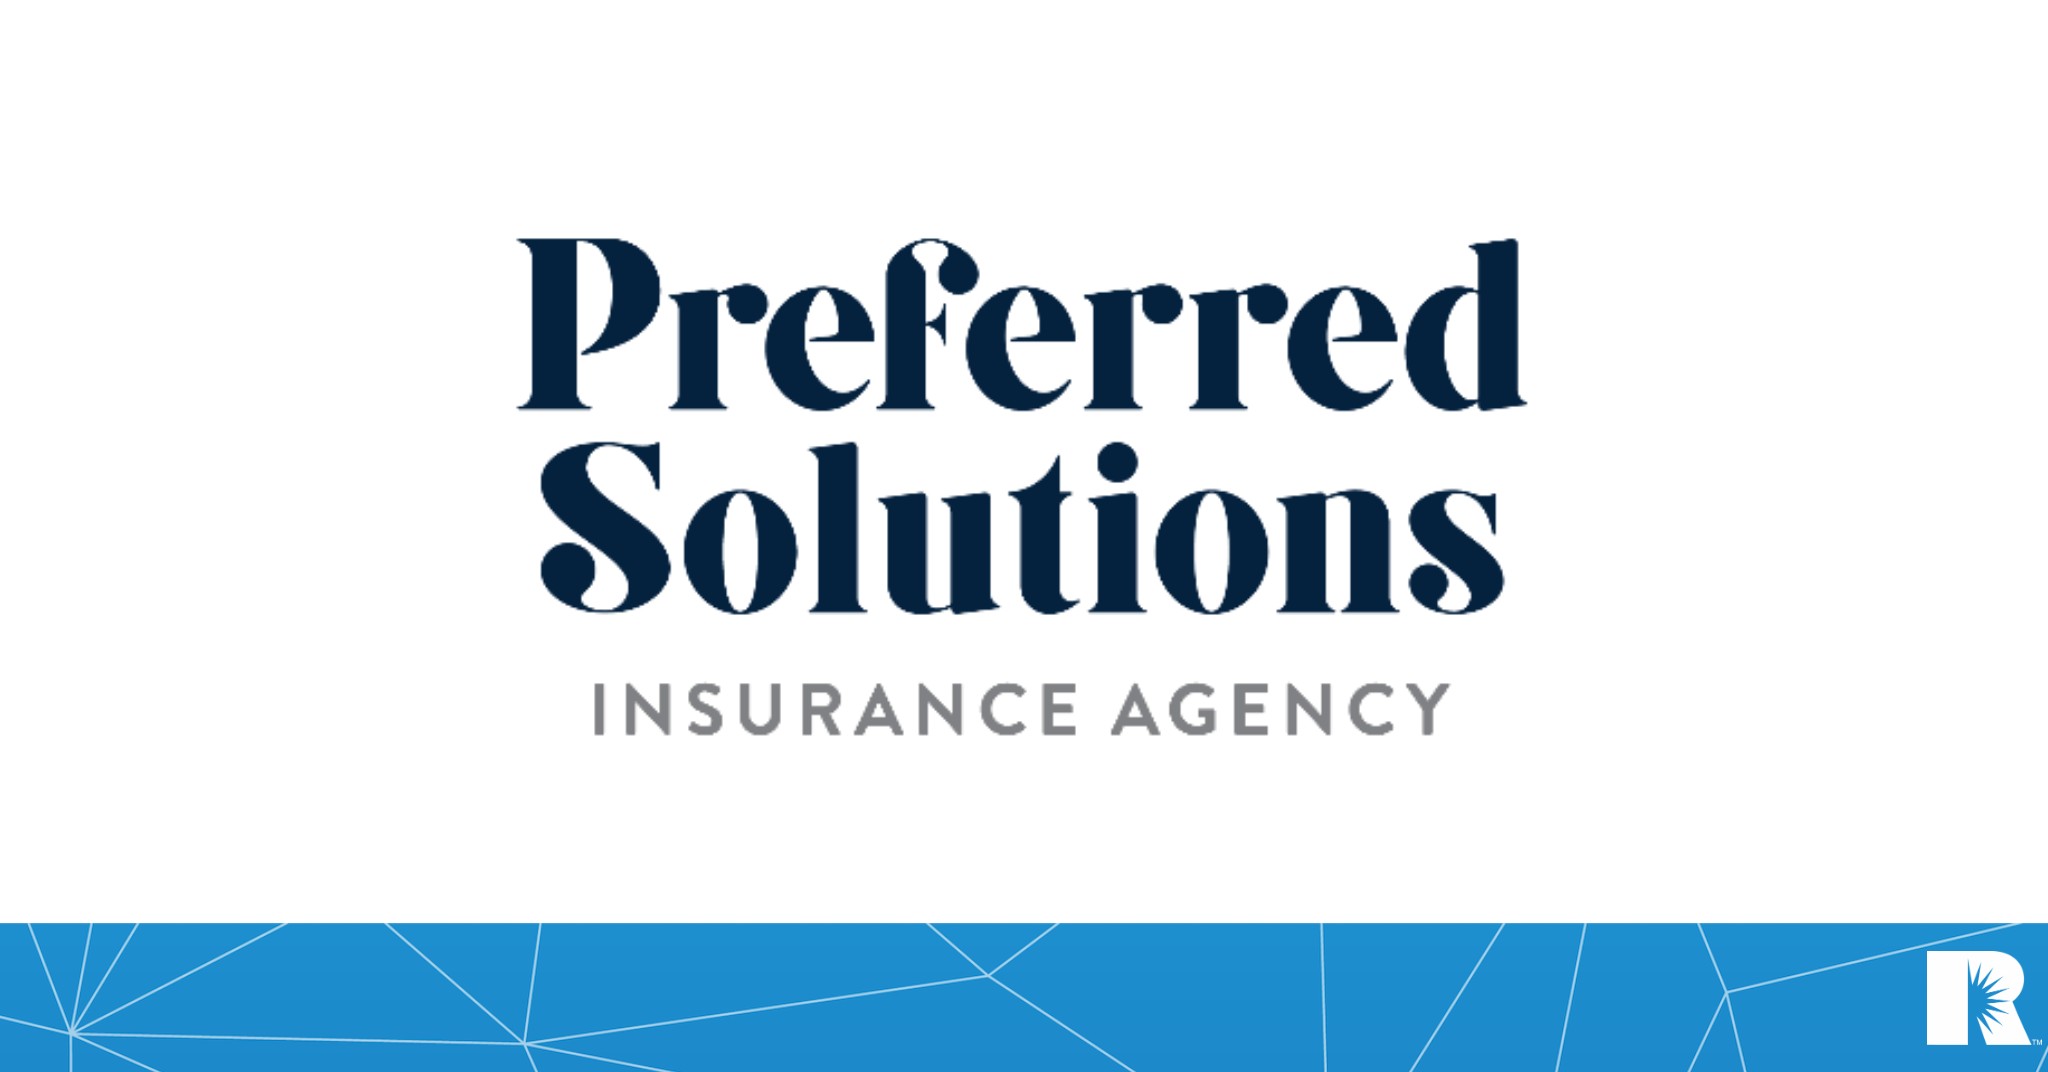 The business logo for Preferred Solutions Insurance Agency.